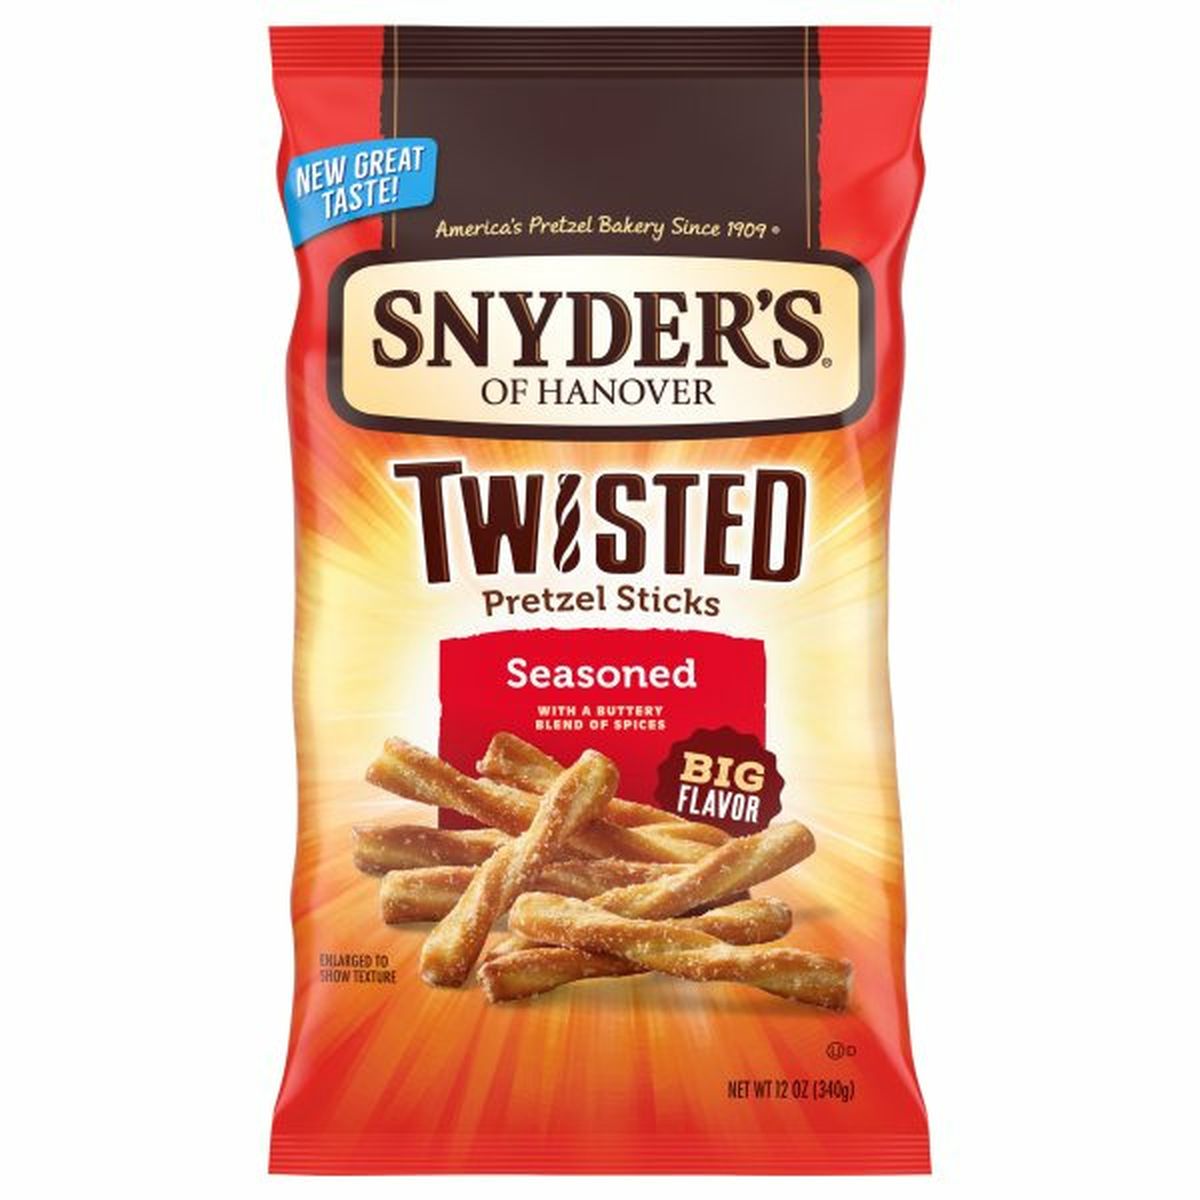 Calories in Snyder's of Hanovers Twisted Pretzel Sticks, Seasoned